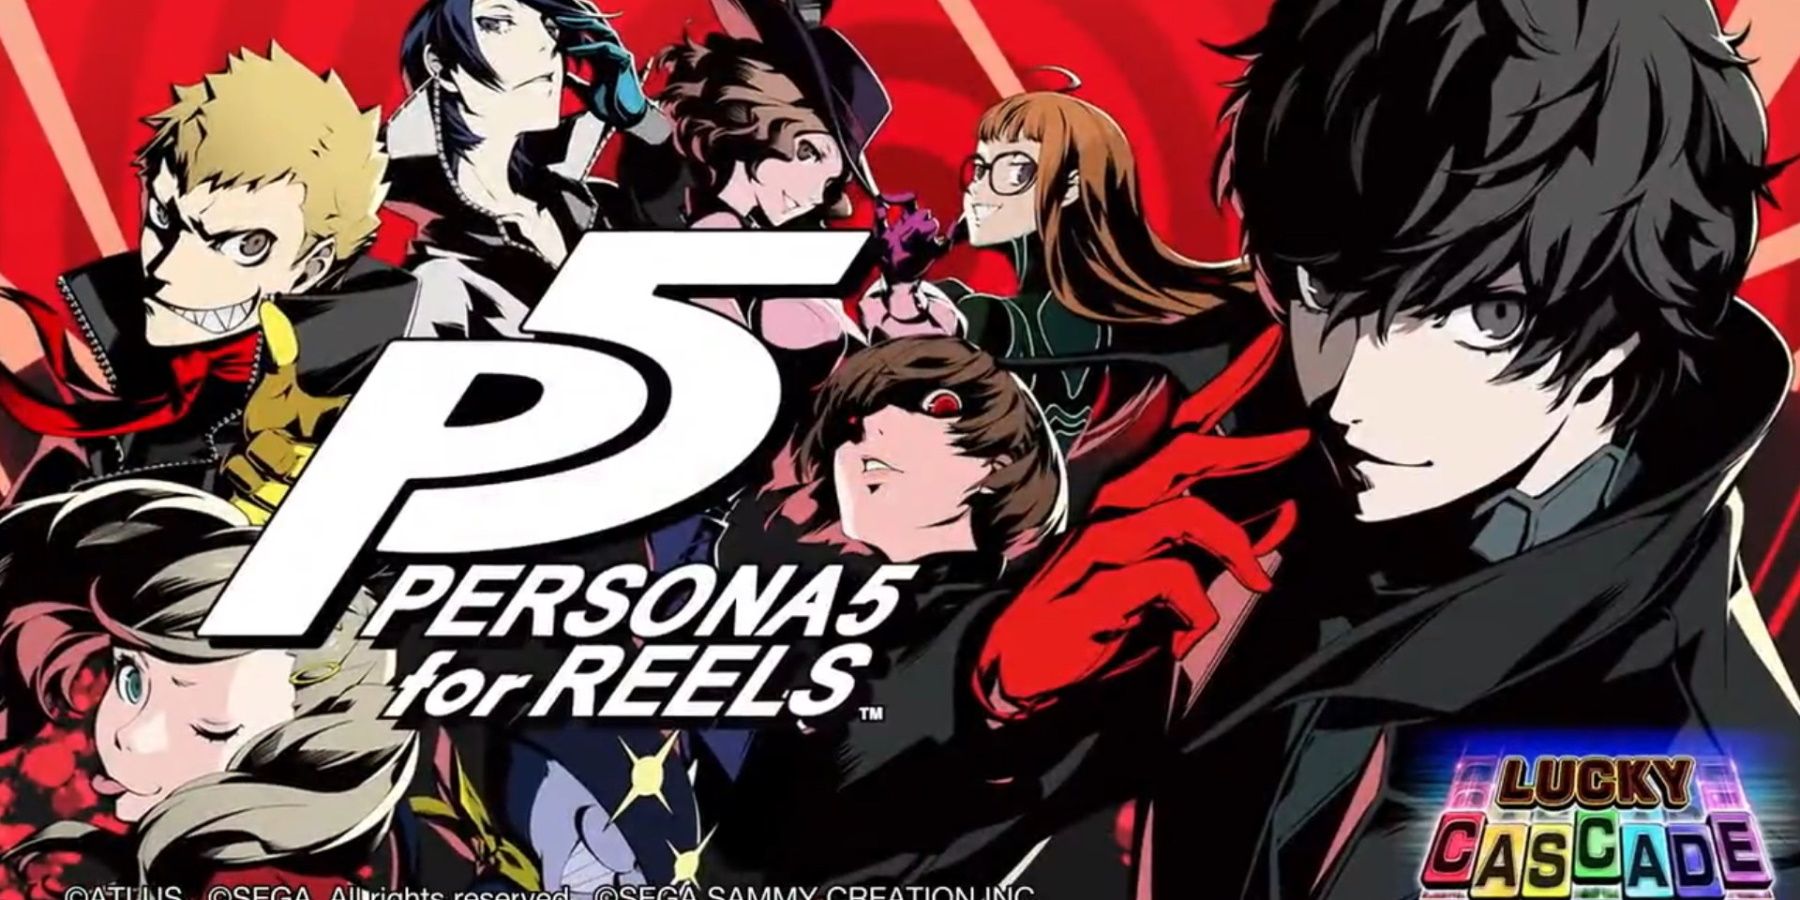 Persona 5 is Getting Its Own Slot Machine